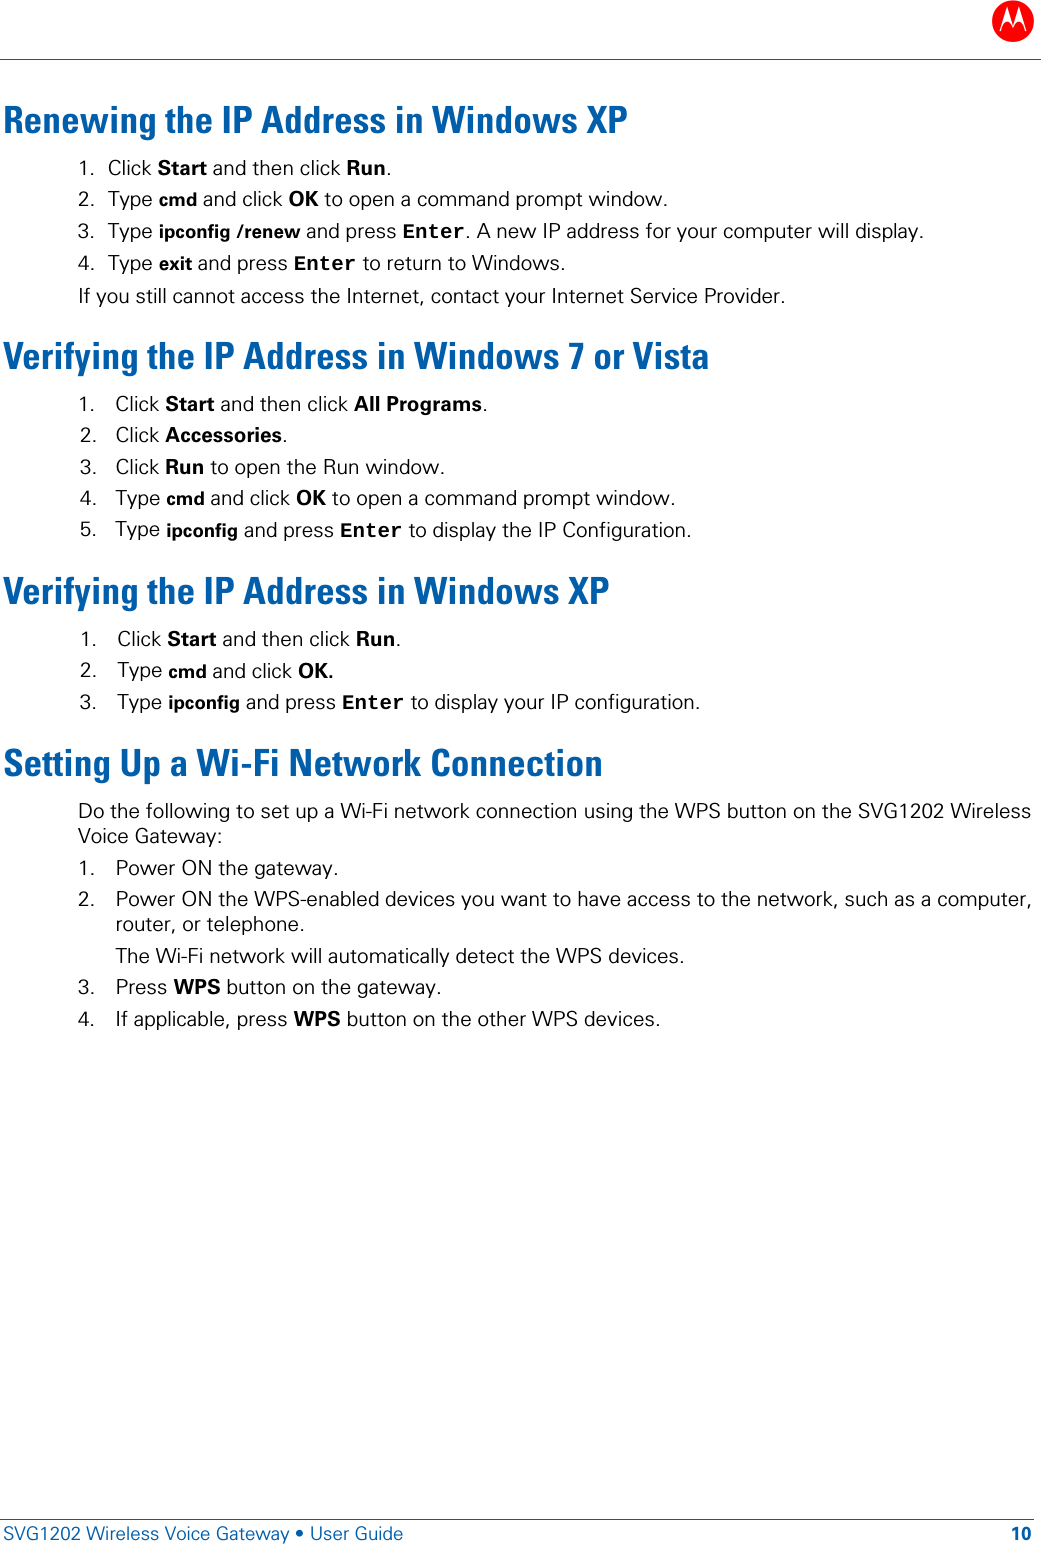 B   SVG1202 Wireless Voice Gateway • User Guide 10  Renewing the IP Address in Windows XP 1. Click Start and then click Run. 2. Type cmd and click OK to open a command prompt window. 3. Type ipconfig /renew and press Enter. A new IP address for your computer will display. 4. Type exit and press Enter to return to Windows.  If you still cannot access the Internet, contact your Internet Service Provider. Verifying the IP Address in Windows 7 or Vista 1. Click Start and then click All Programs. 2. Click Accessories. 3. Click Run to open the Run window. 4. Type cmd and click OK to open a command prompt window. 5. Type ipconfig and press Enter to display the IP Configuration. Verifying the IP Address in Windows XP 1. Click Start and then click Run.  2. Type cmd and click OK.  3. Type ipconfig and press Enter to display your IP configuration. Setting Up a Wi-Fi Network Connection Do the following to set up a Wi-Fi network connection using the WPS button on the SVG1202 Wireless Voice Gateway: 1. Power ON the gateway. 2. Power ON the WPS-enabled devices you want to have access to the network, such as a computer, router, or telephone. The Wi-Fi network will automatically detect the WPS devices.  3. Press WPS button on the gateway. 4. If applicable, press WPS button on the other WPS devices.  